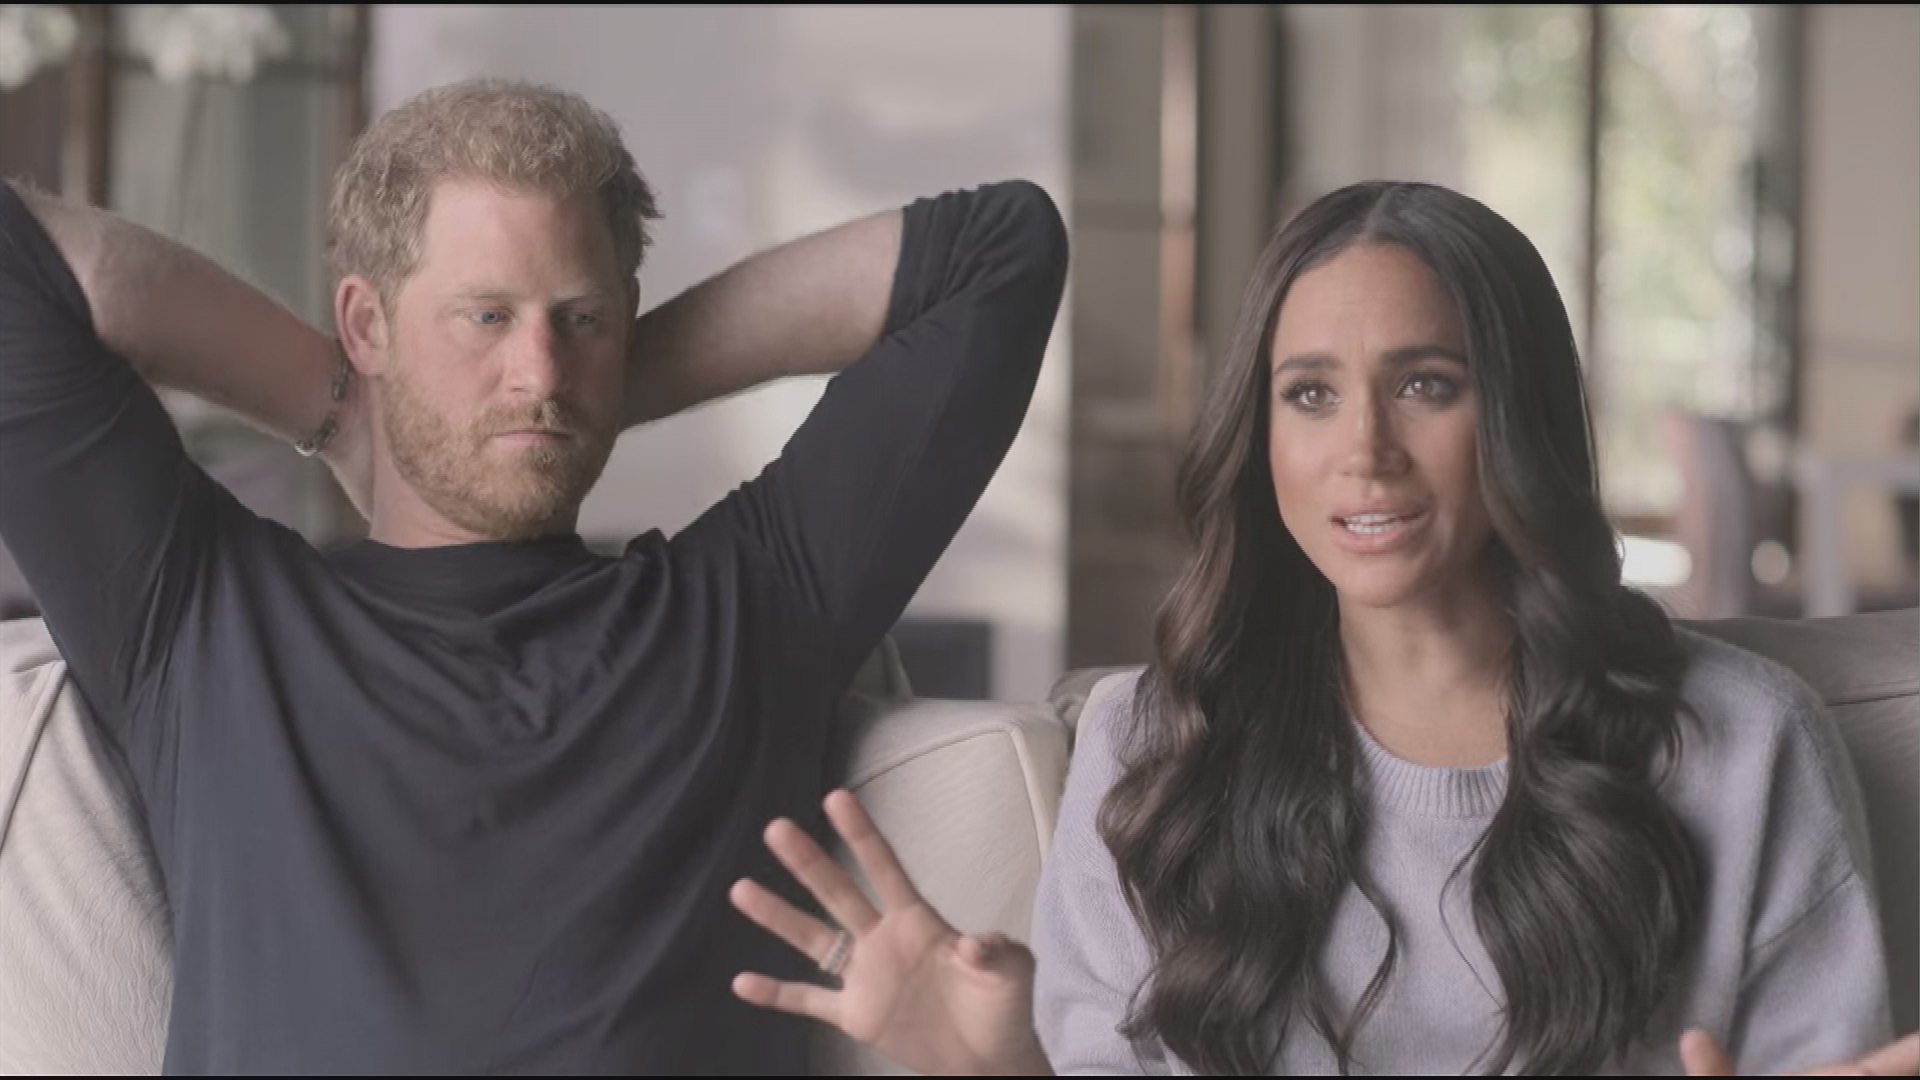 Still image from Harry & Meghan docuseries episodes 3-6